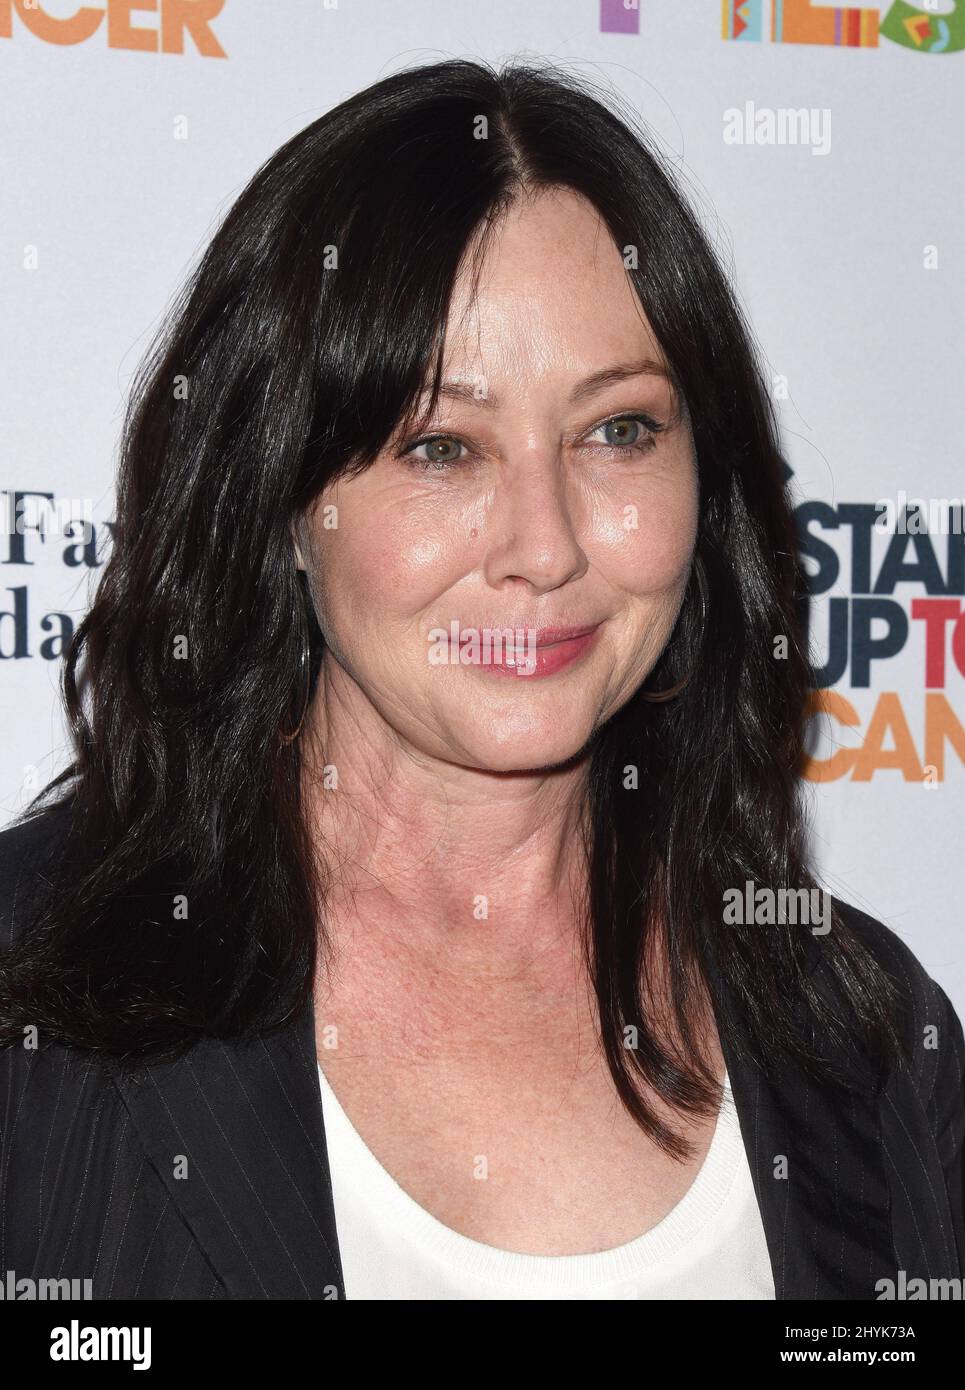 Shannen Doherty at The Farrah Fawcett Foundation's Tex-Mex Fiesta held at the Wallis Annenberg Center for the Performing Arts on September 6, 2019 in Beverly Hills, USA. Stock Photo